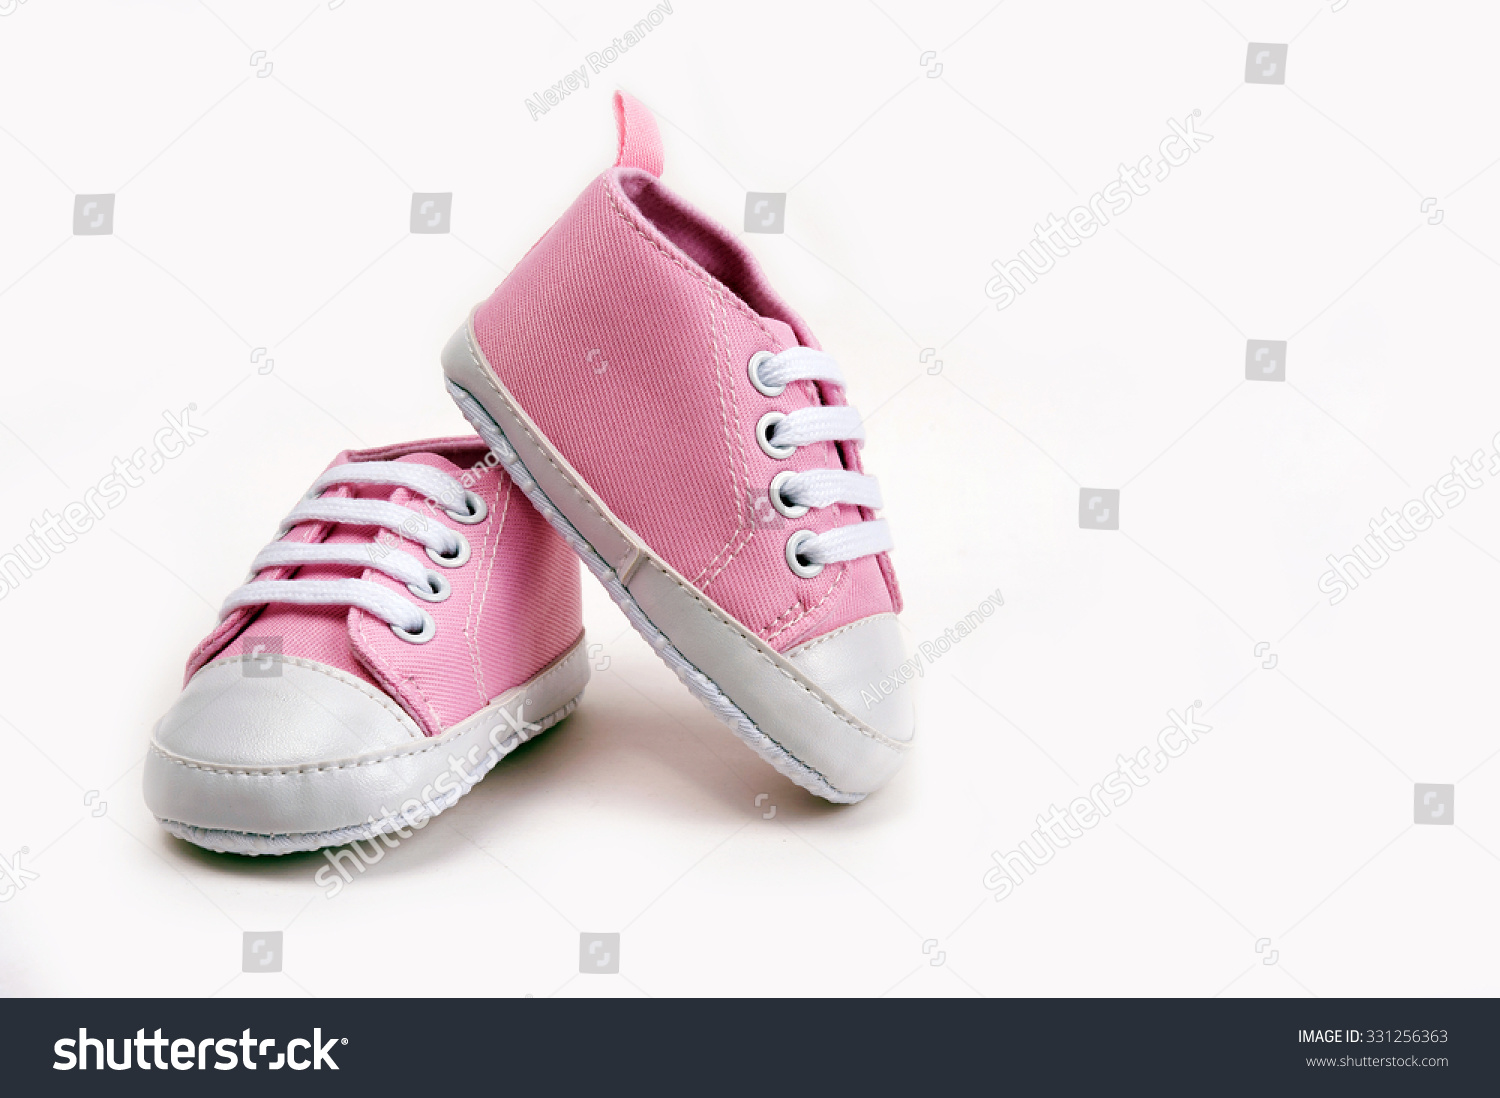 pink baby sneakers